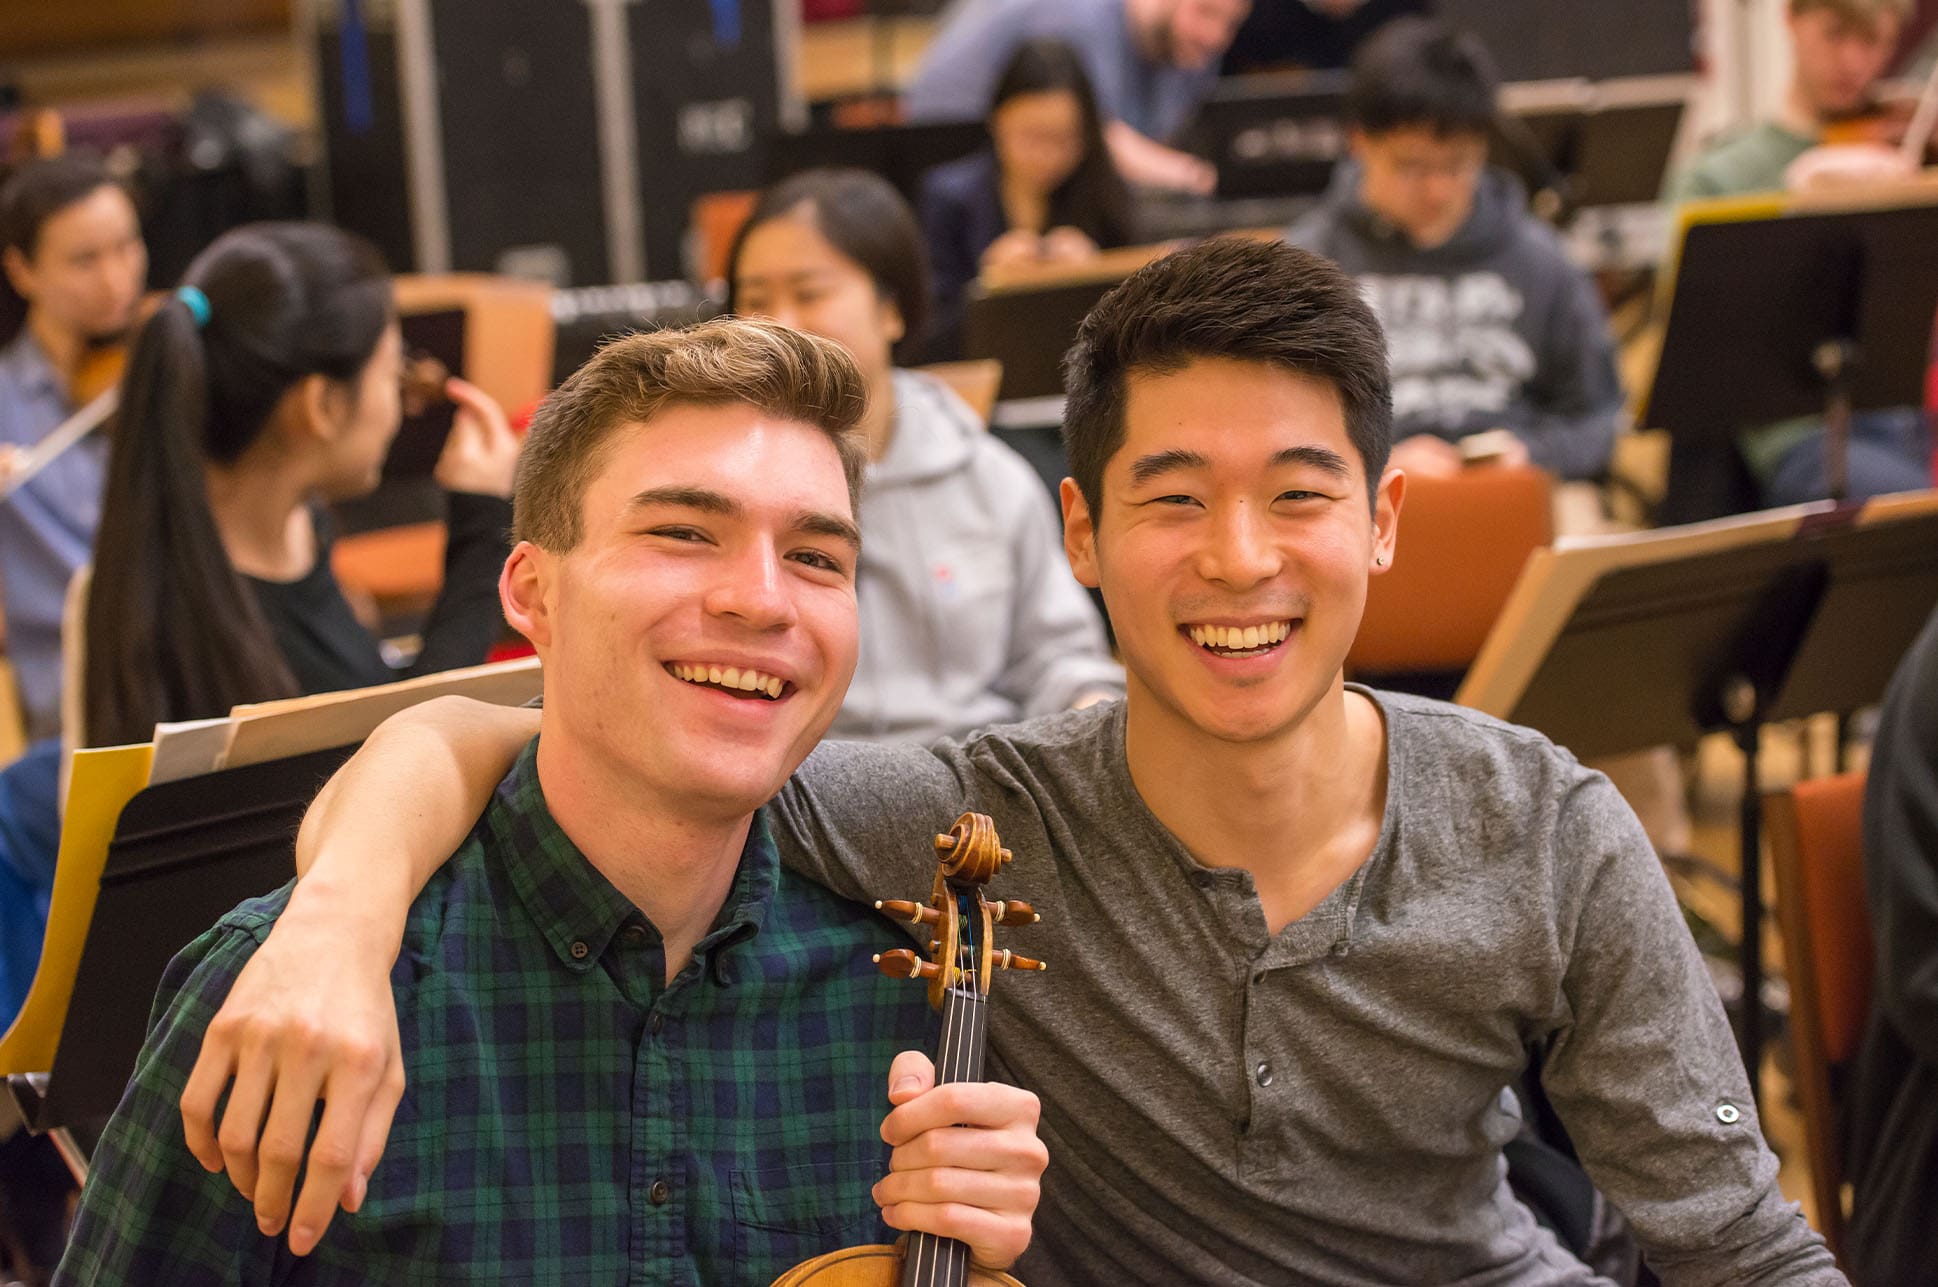 Two students smiling, with one holding a violin.